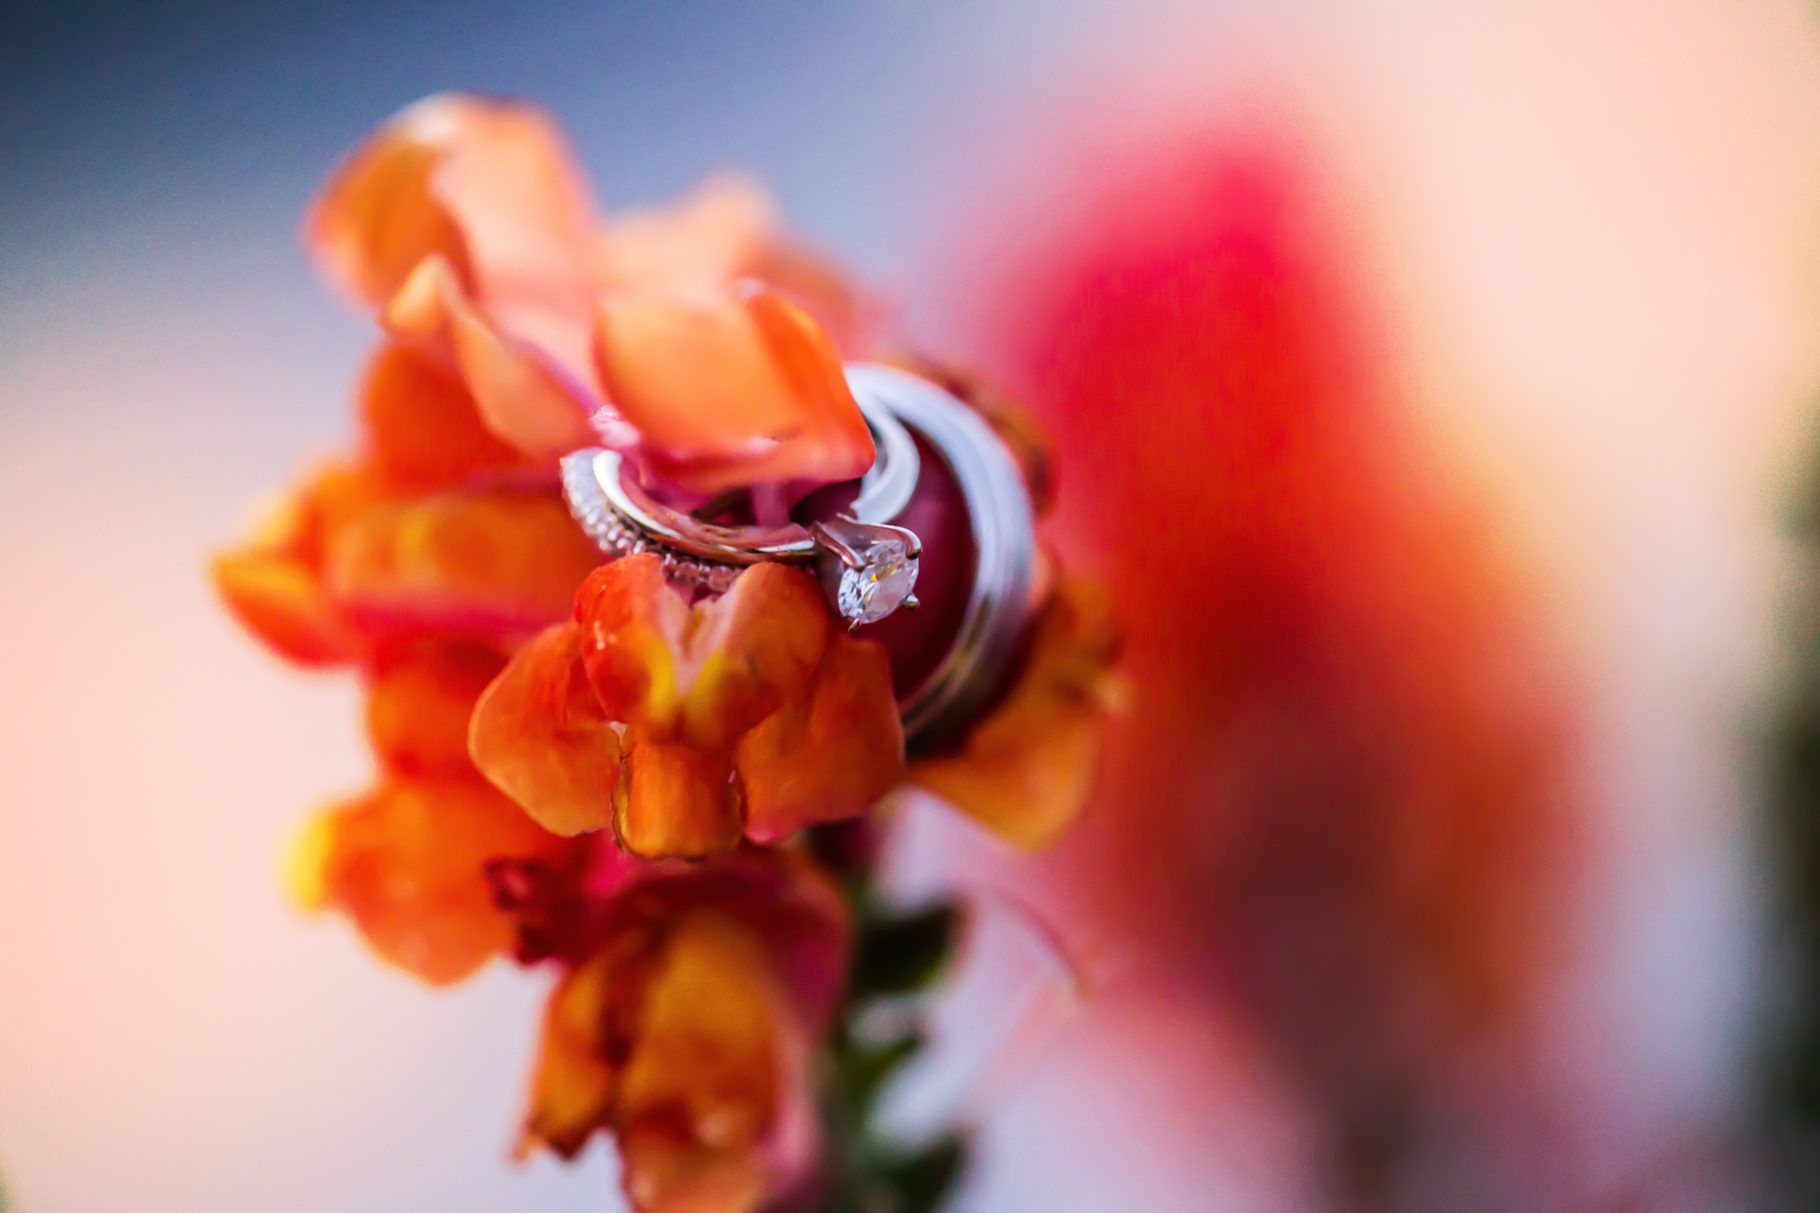 colorful wedding rings on red and orange flowers